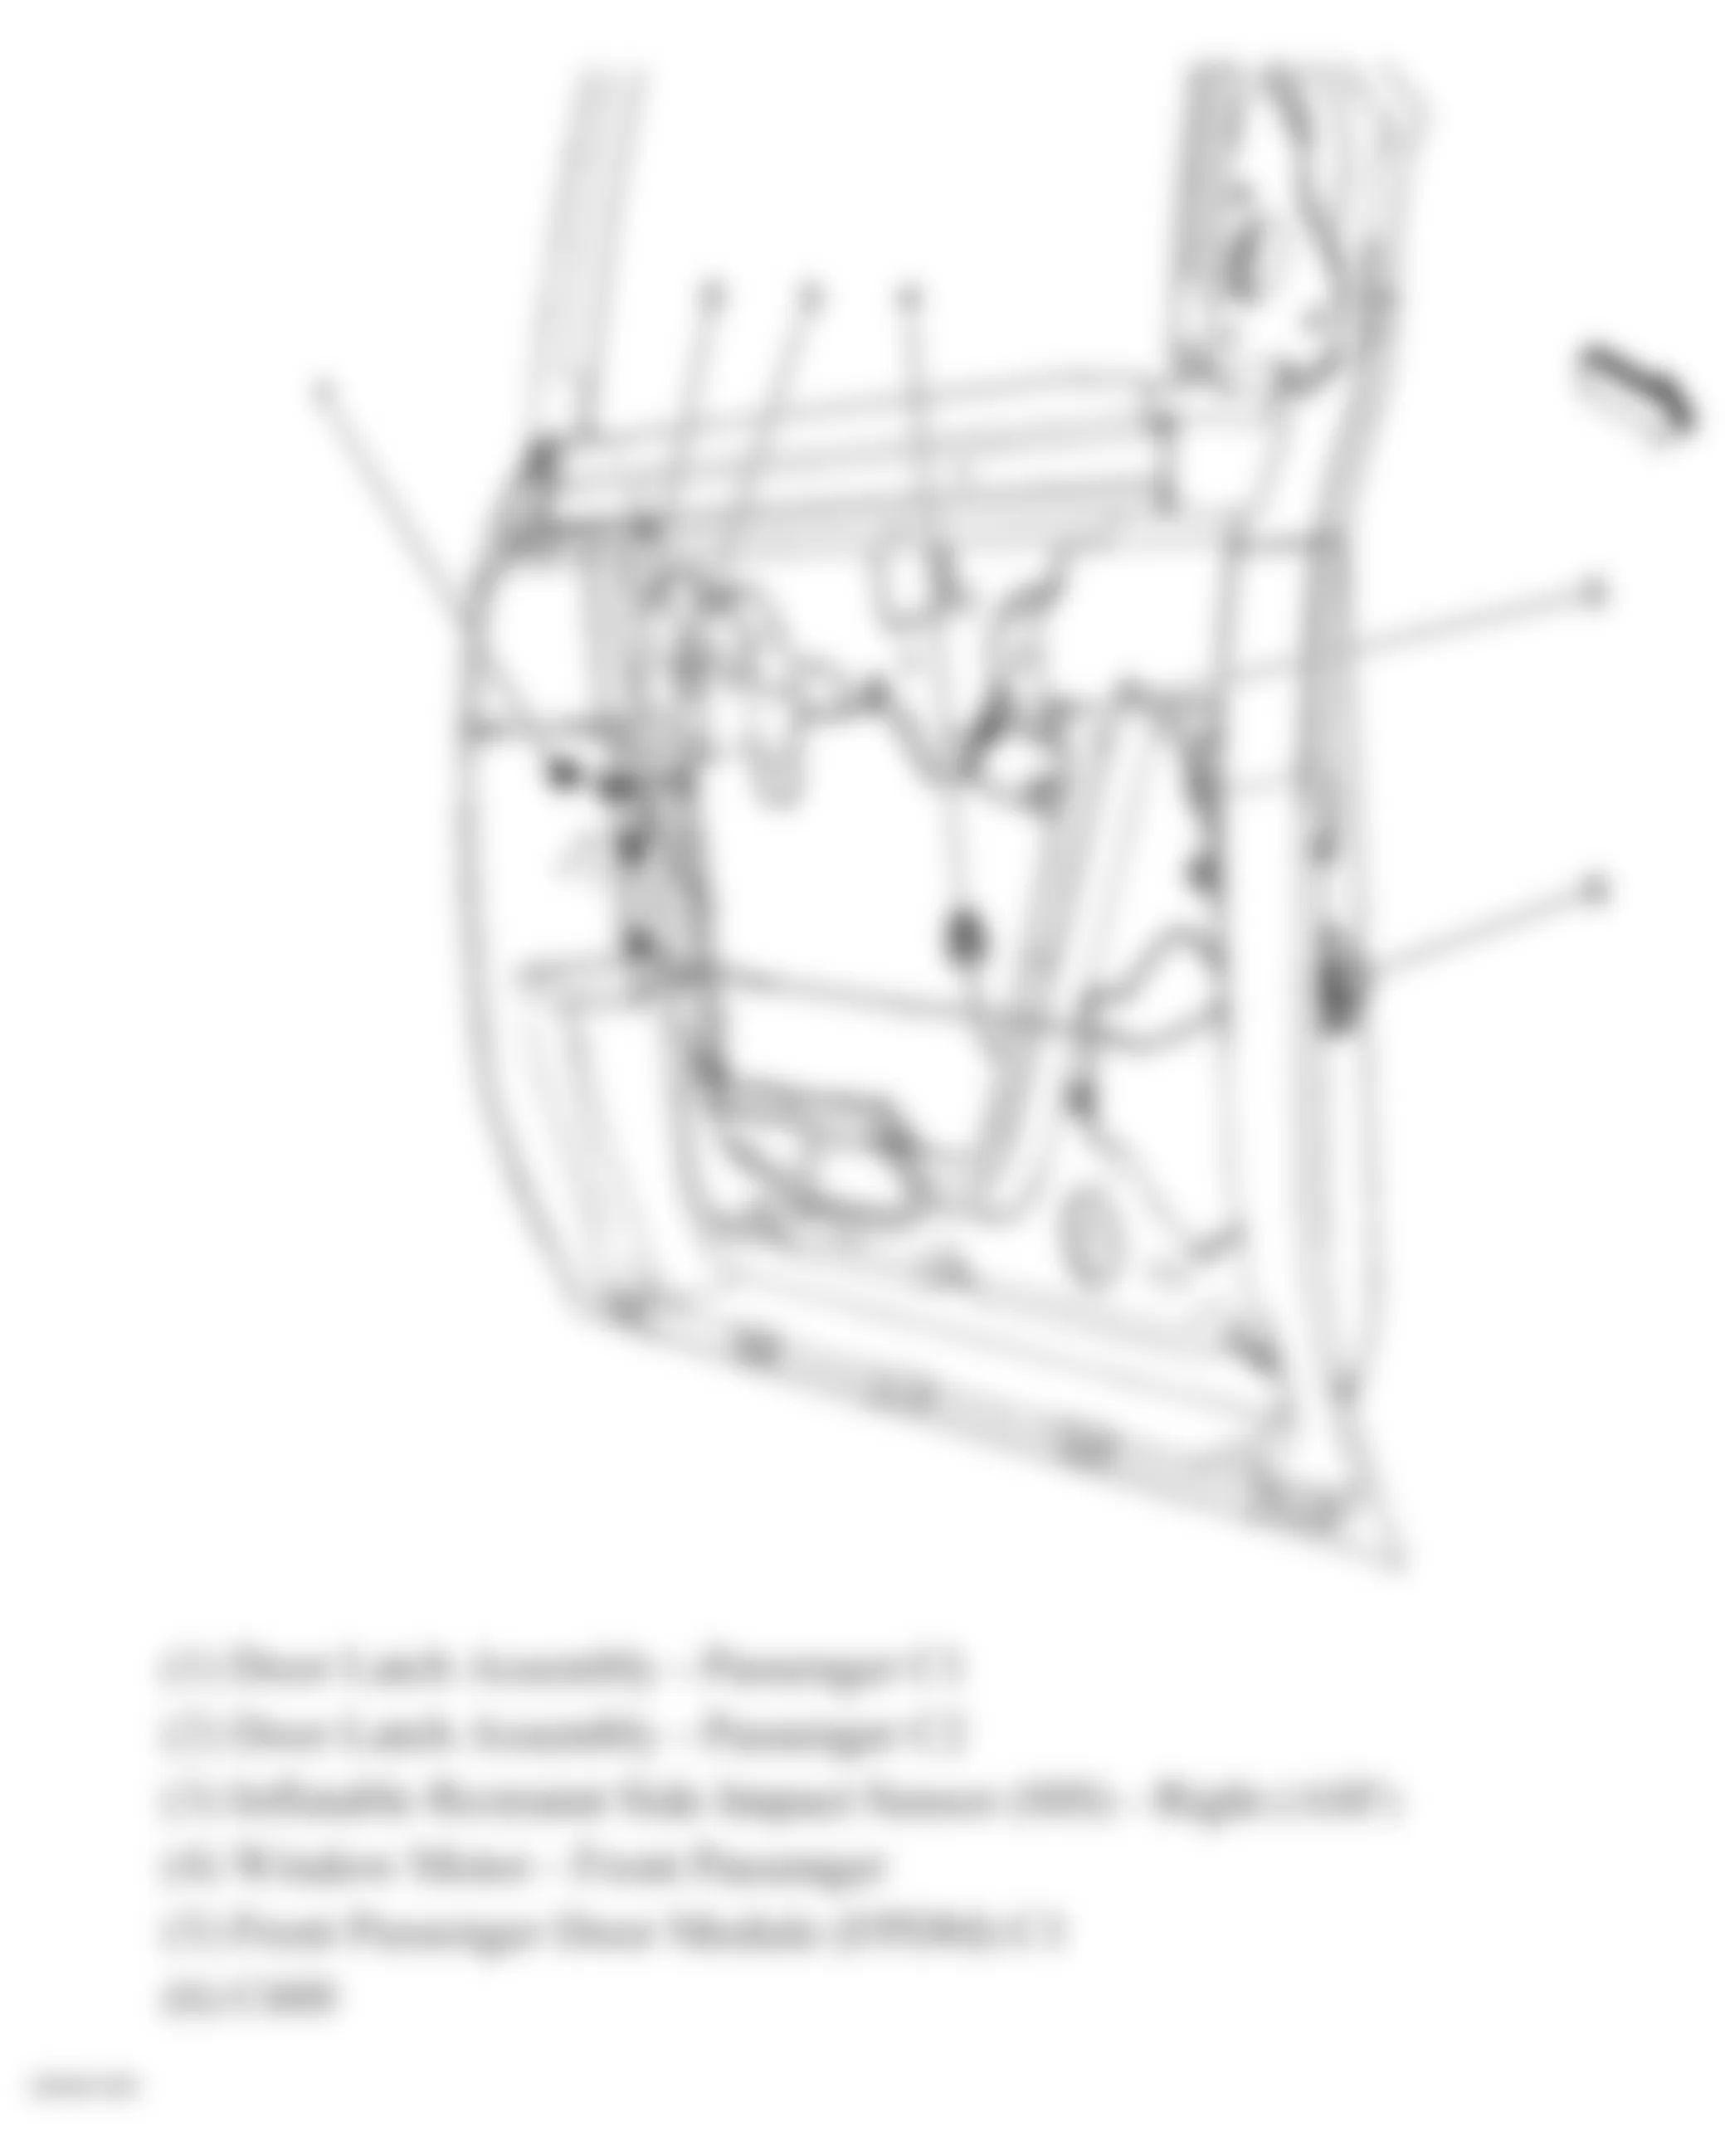 Isuzu Ascender S 2007 - Component Locations -  Right Front Door Harness Routing